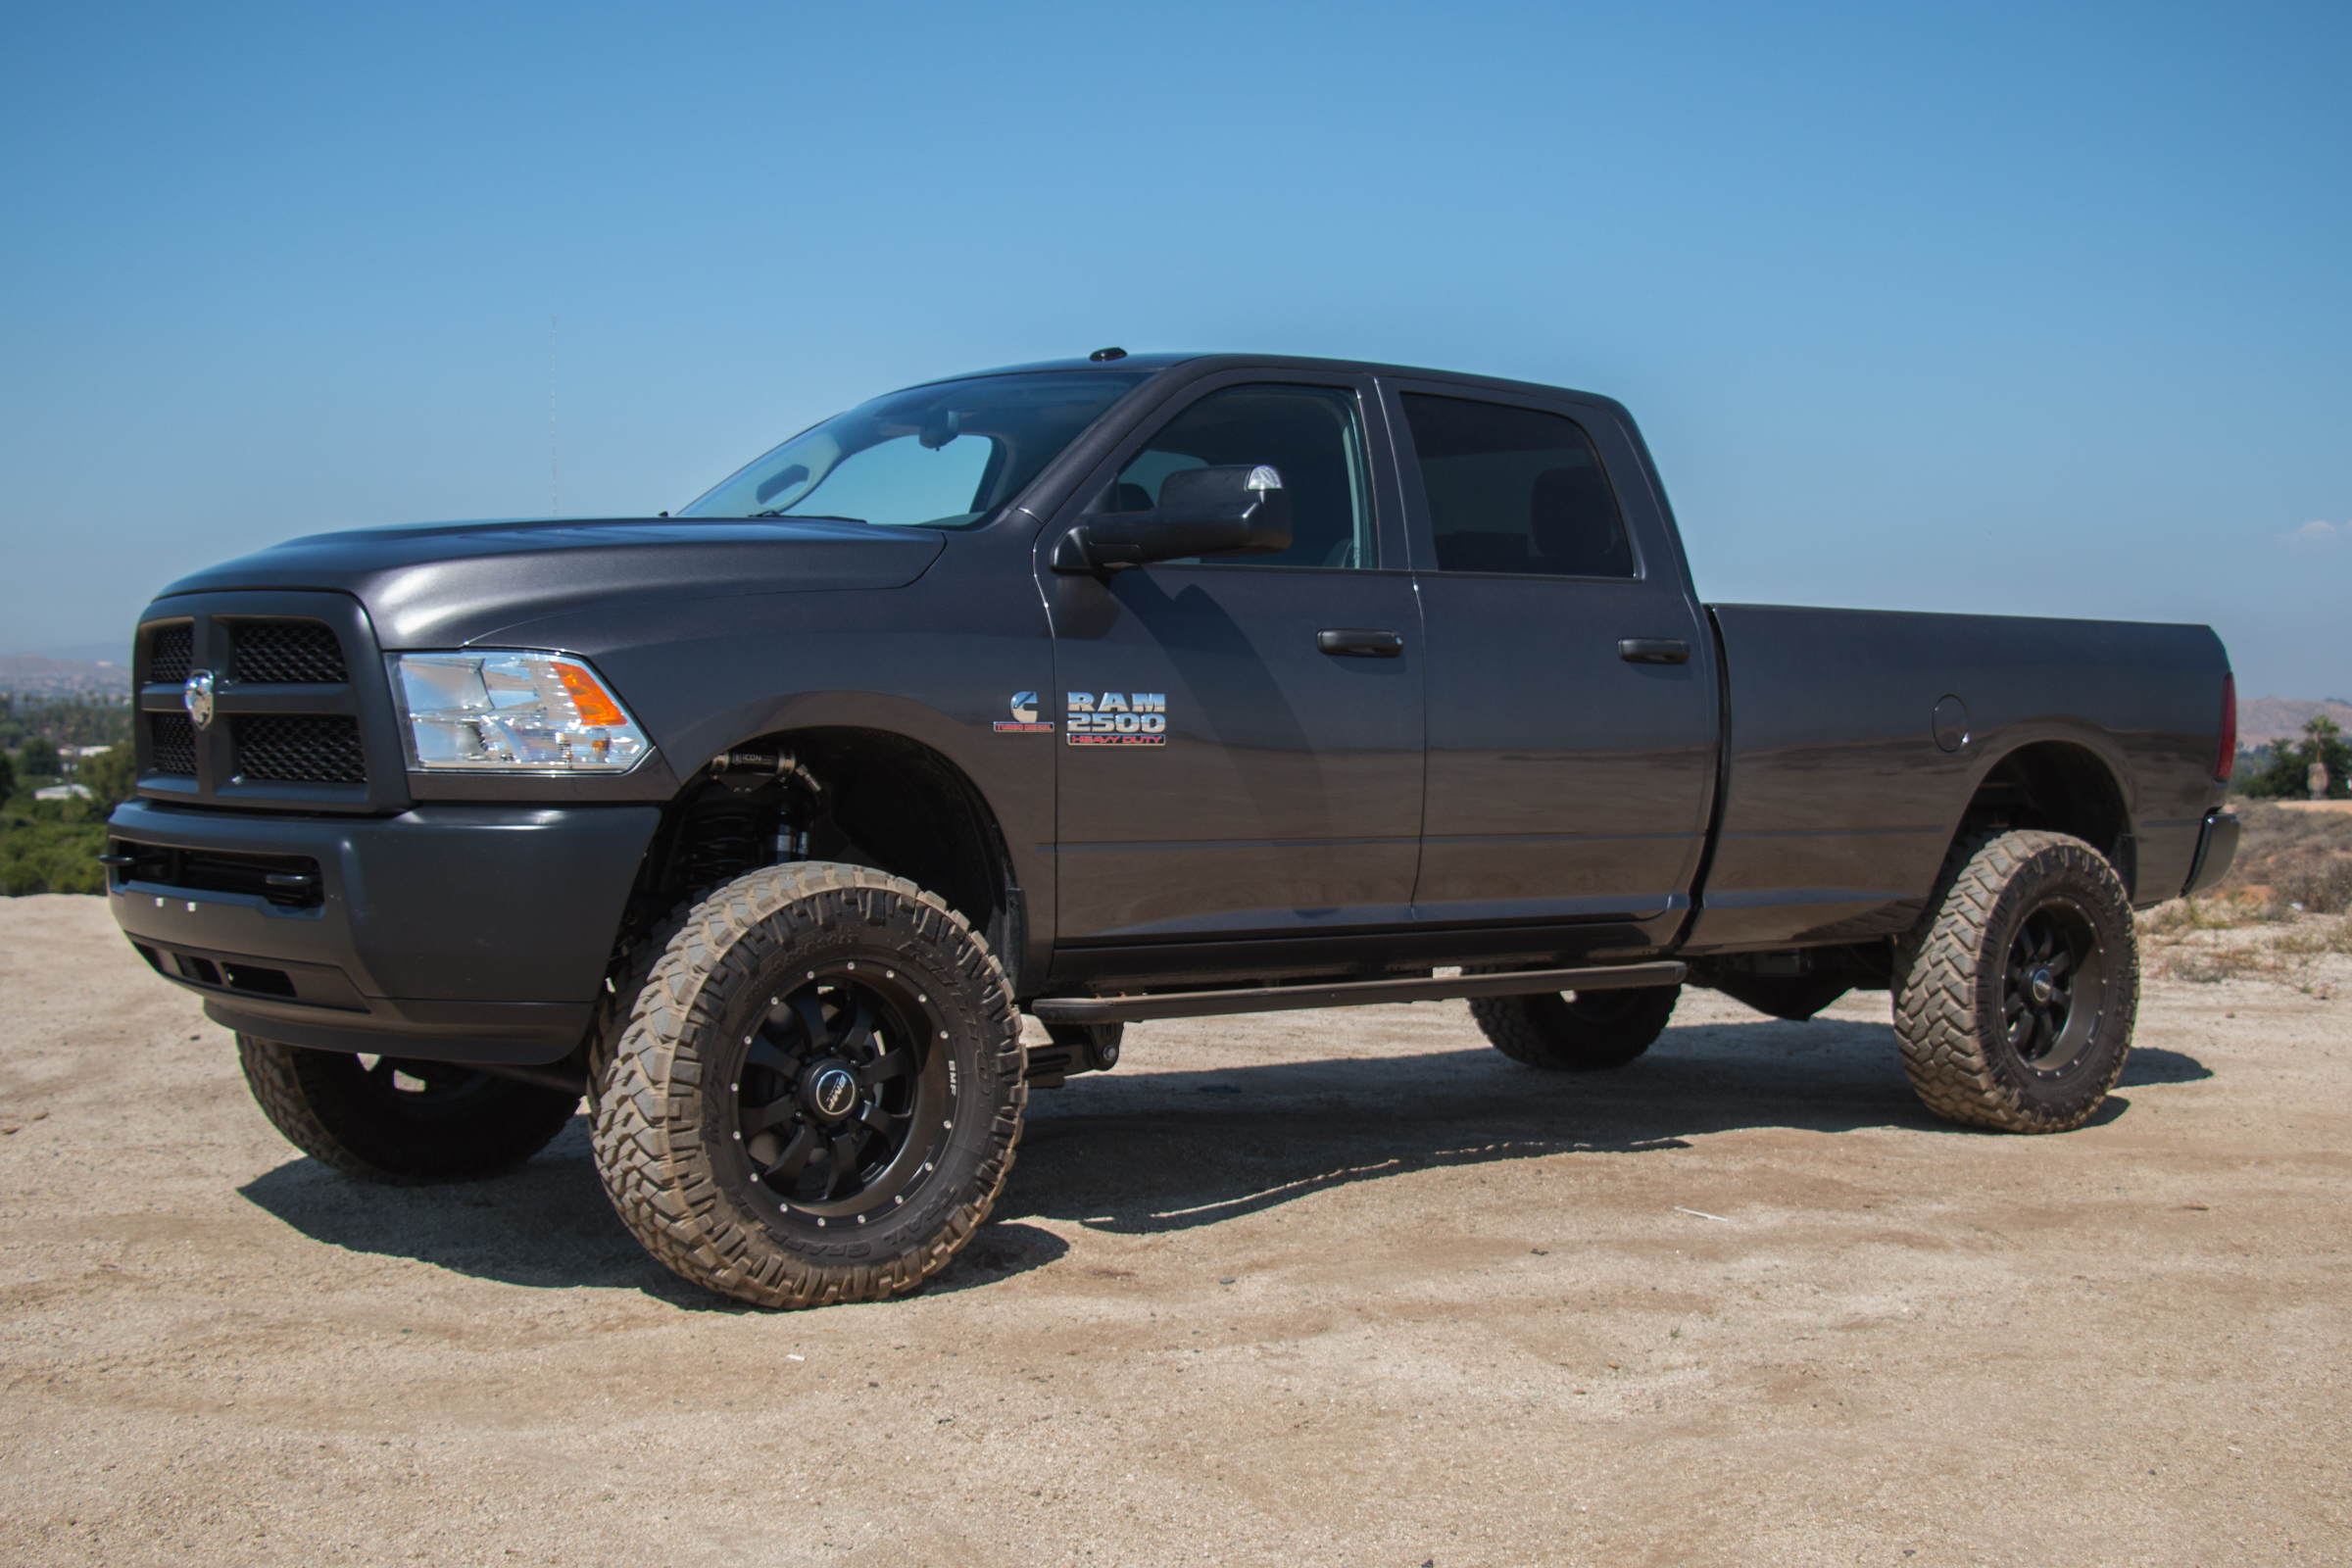 ICON 2014-18 Ram 2500 4WD, 4.5" Lift, Stage 2 Suspension System, w/ OEM Air Ride